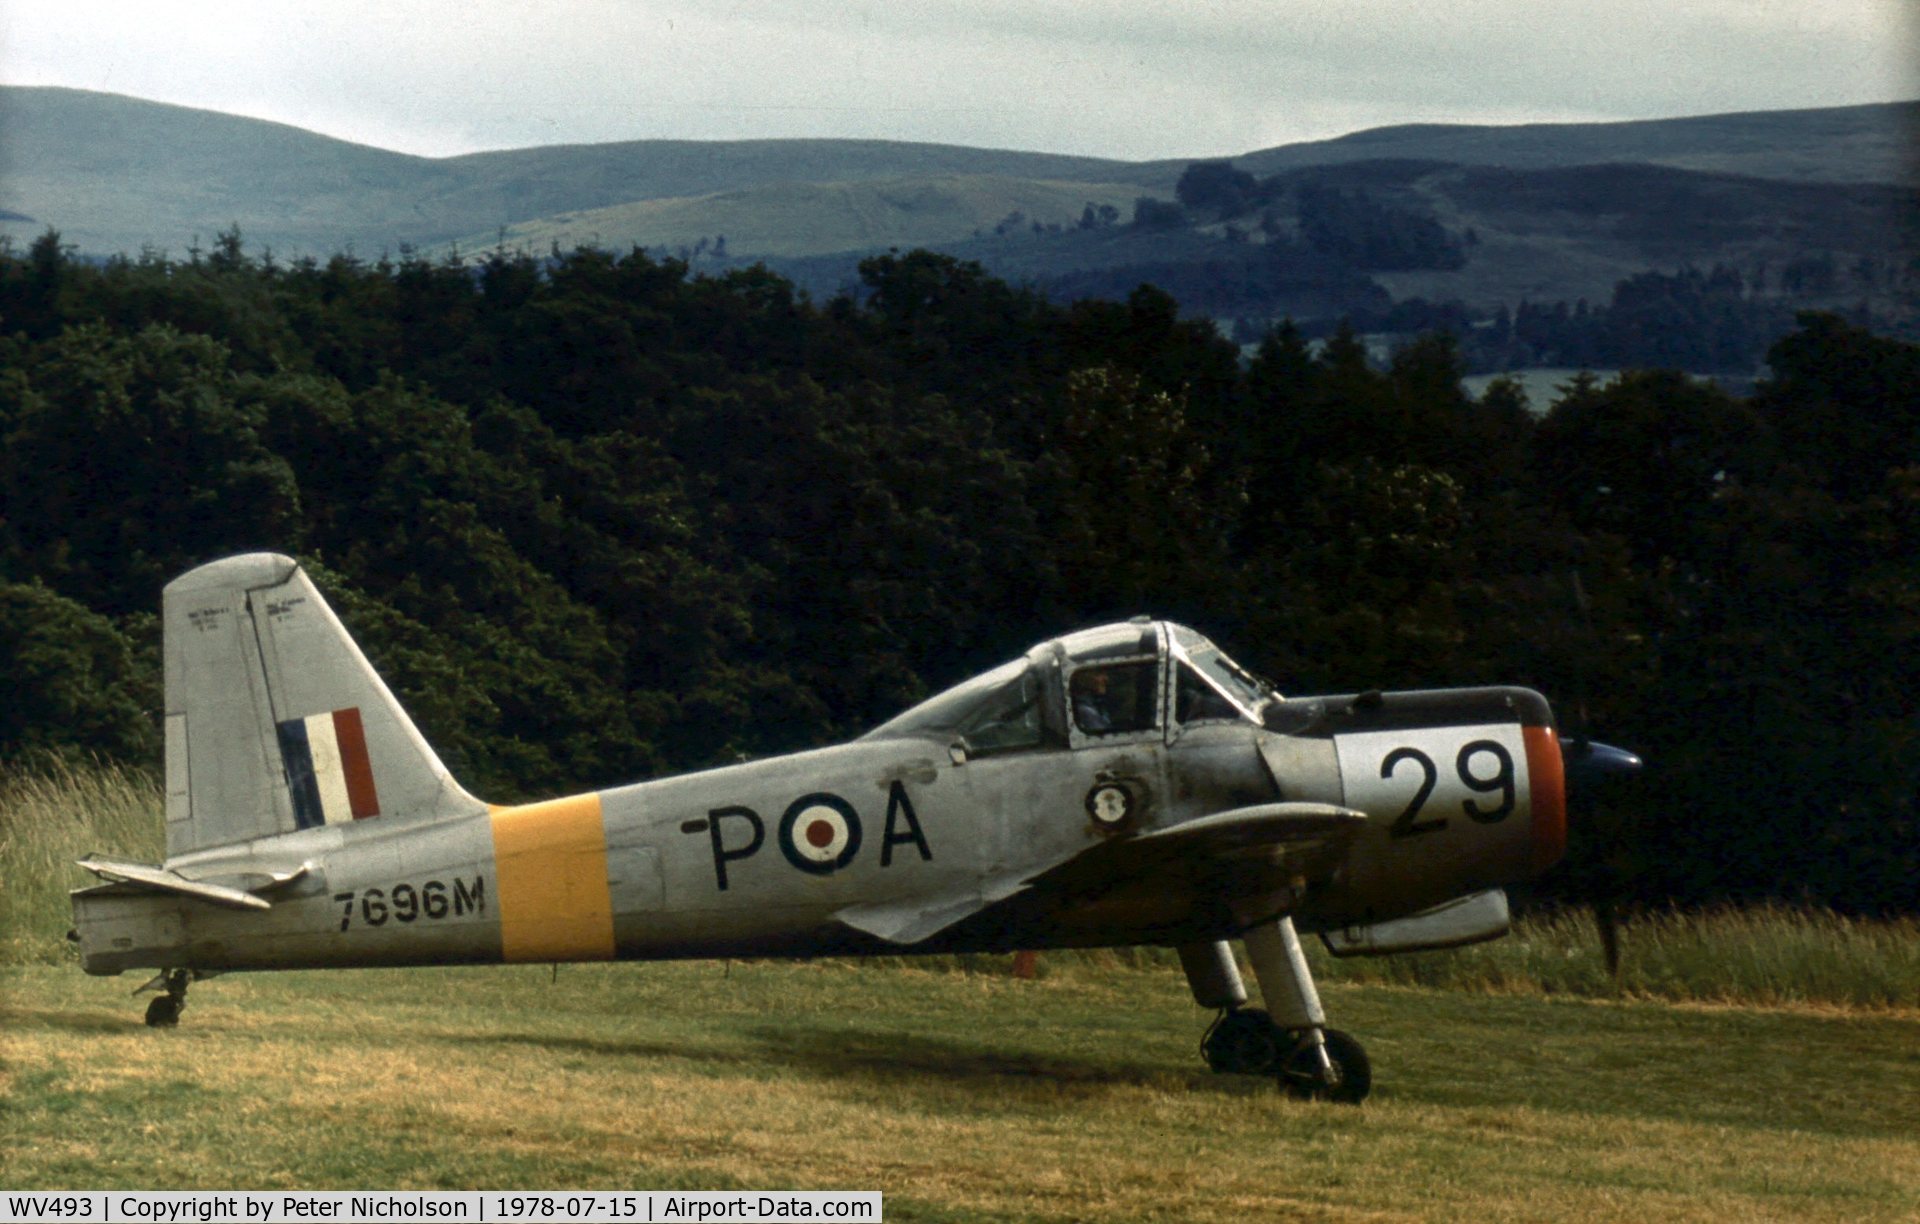 WV493, 1953 Percival P-56 Provost T.1 C/N PAC/56/056, Now in museum storage, this Provost T.1 was active at the 1978 Strathallan Open Day.